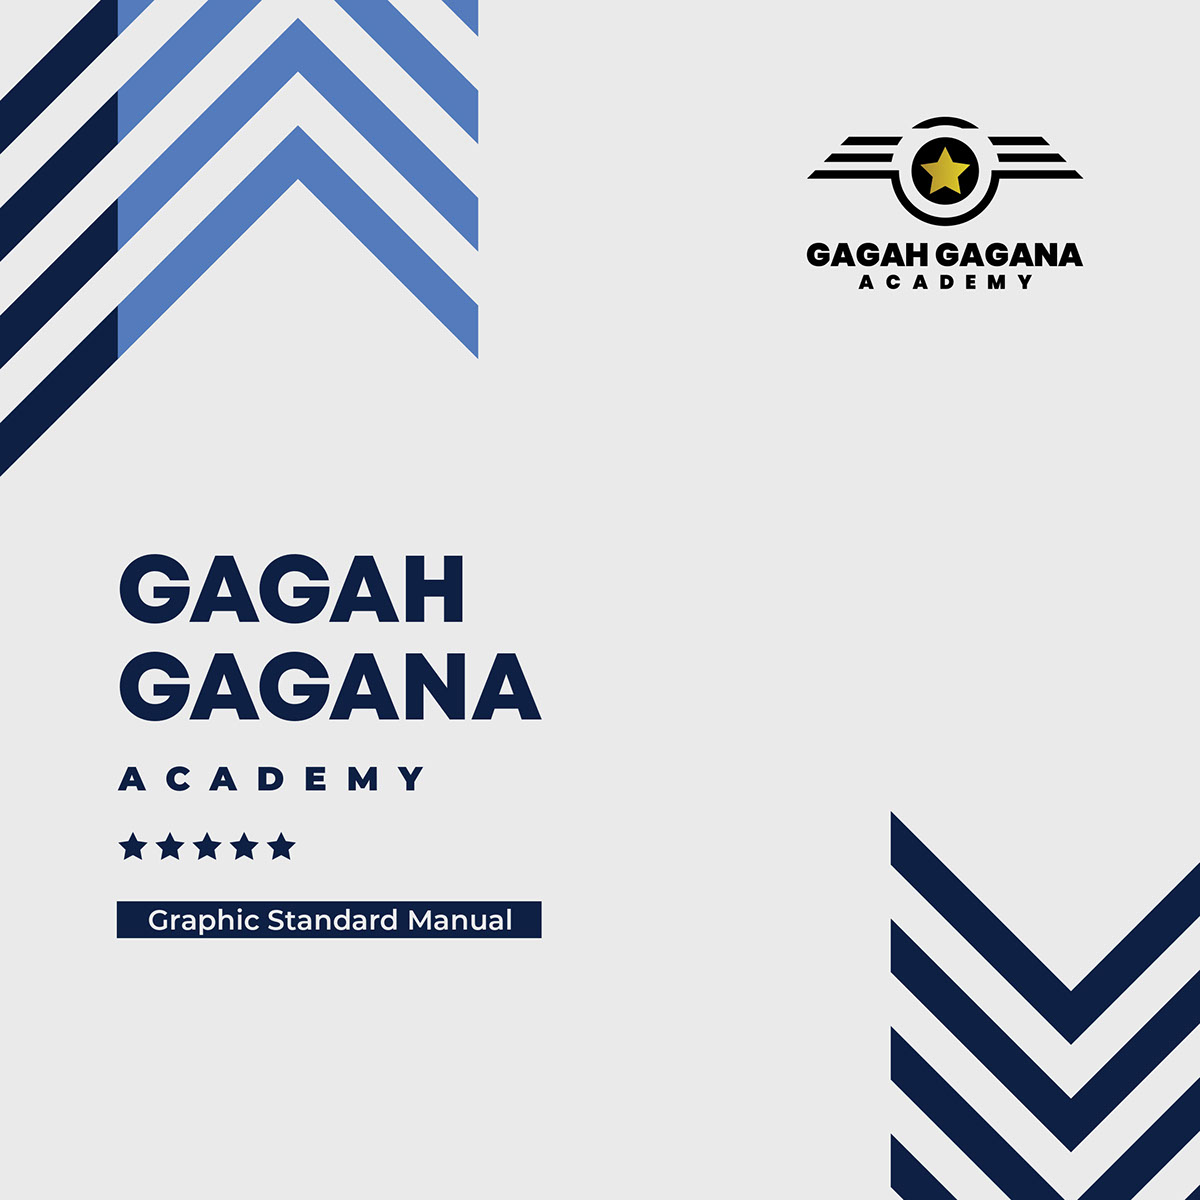 Graphic Standard Manual - Gagah Gagana Academy Project rendition image